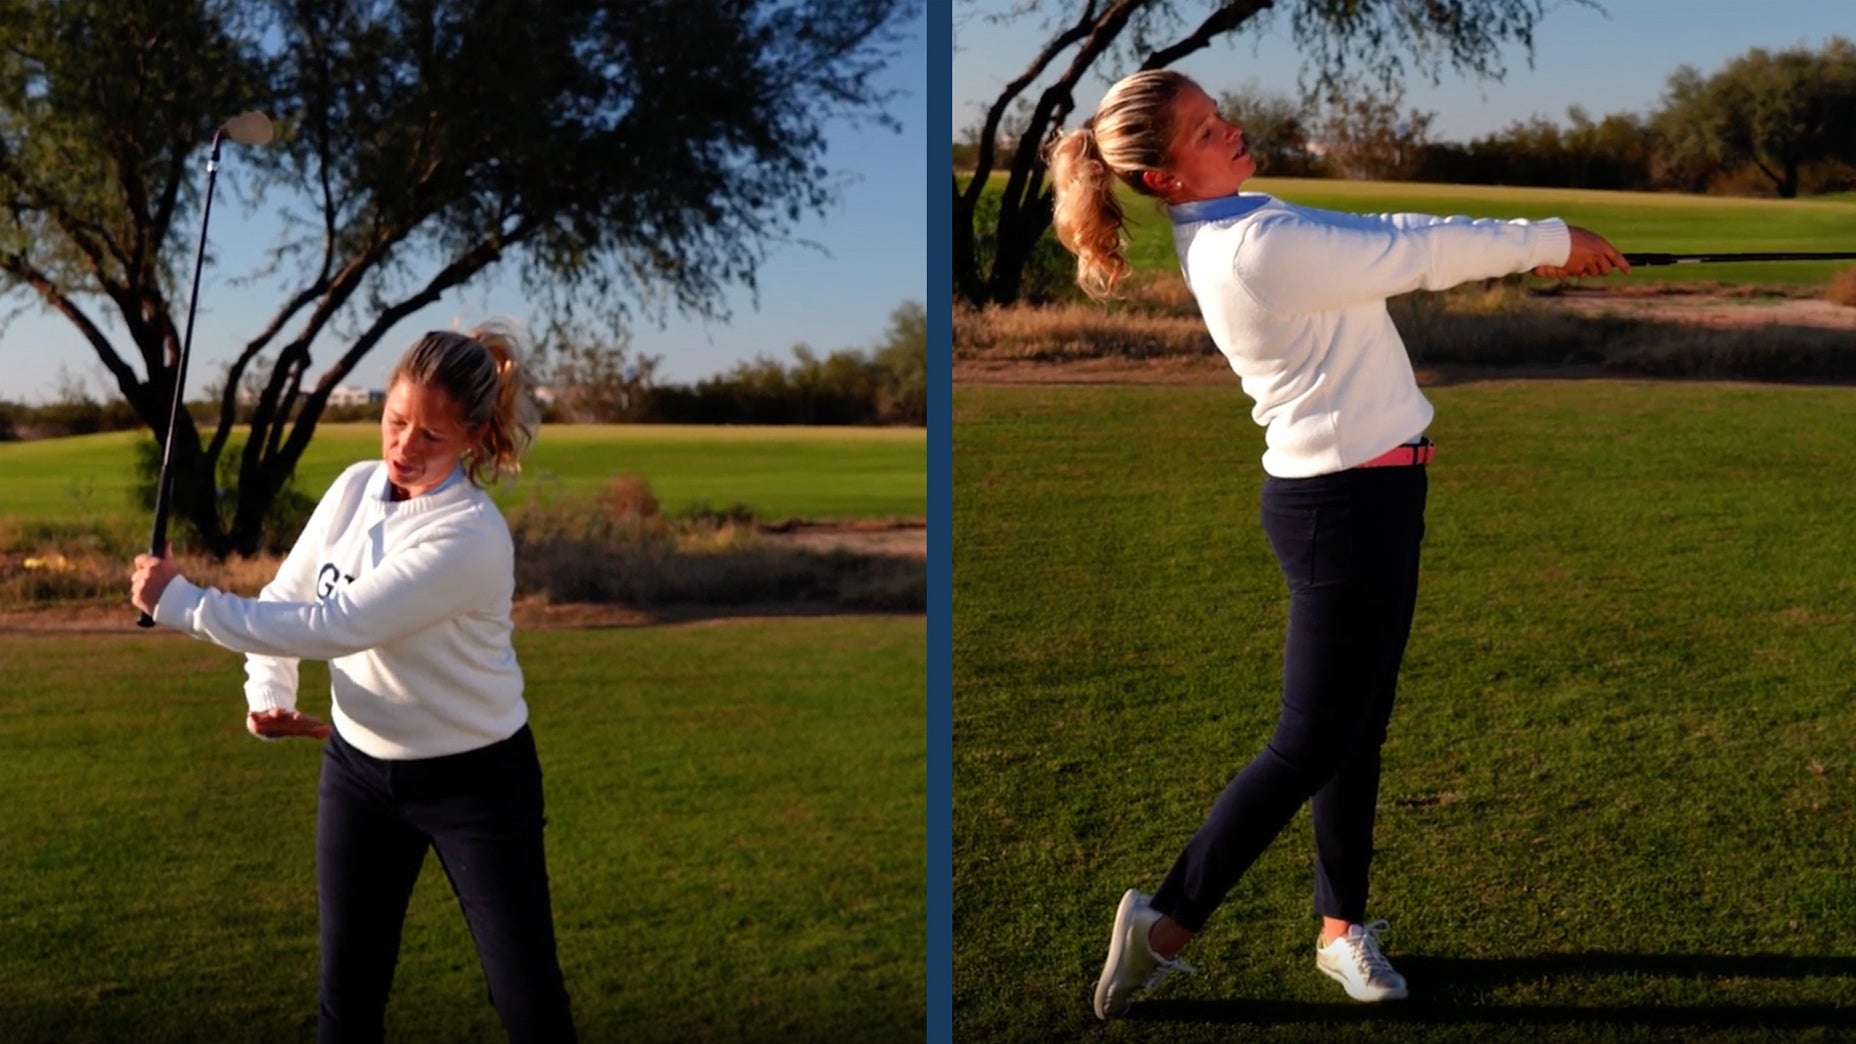 This Babe Ruth Drill Helps You Extend Through Your Shot Just Like The Pros